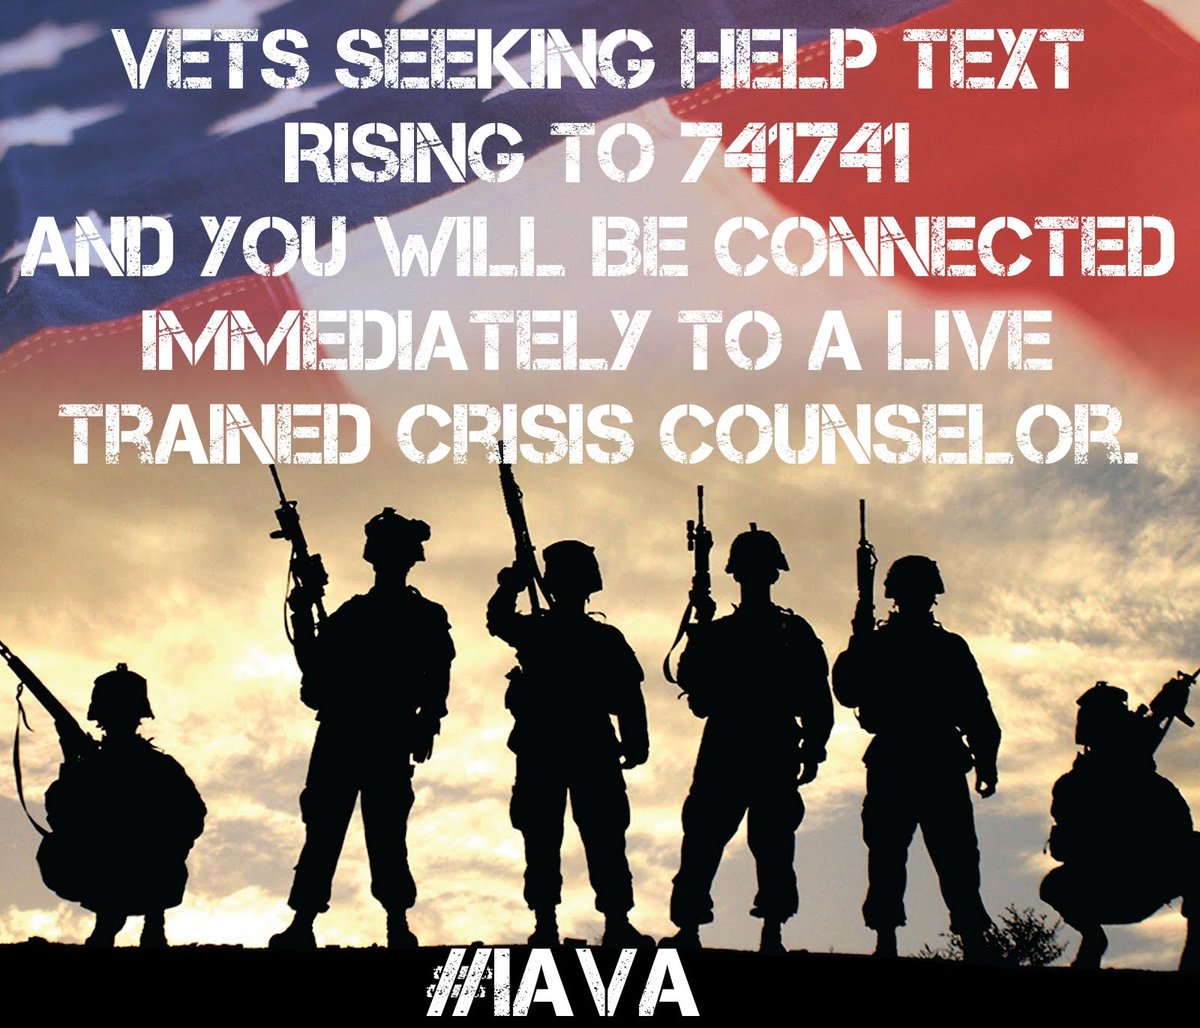 3/ Vets seeking help Text RISING to 741741 and you will be connected immediately to a live trained Crisis Counselor. #IAVA